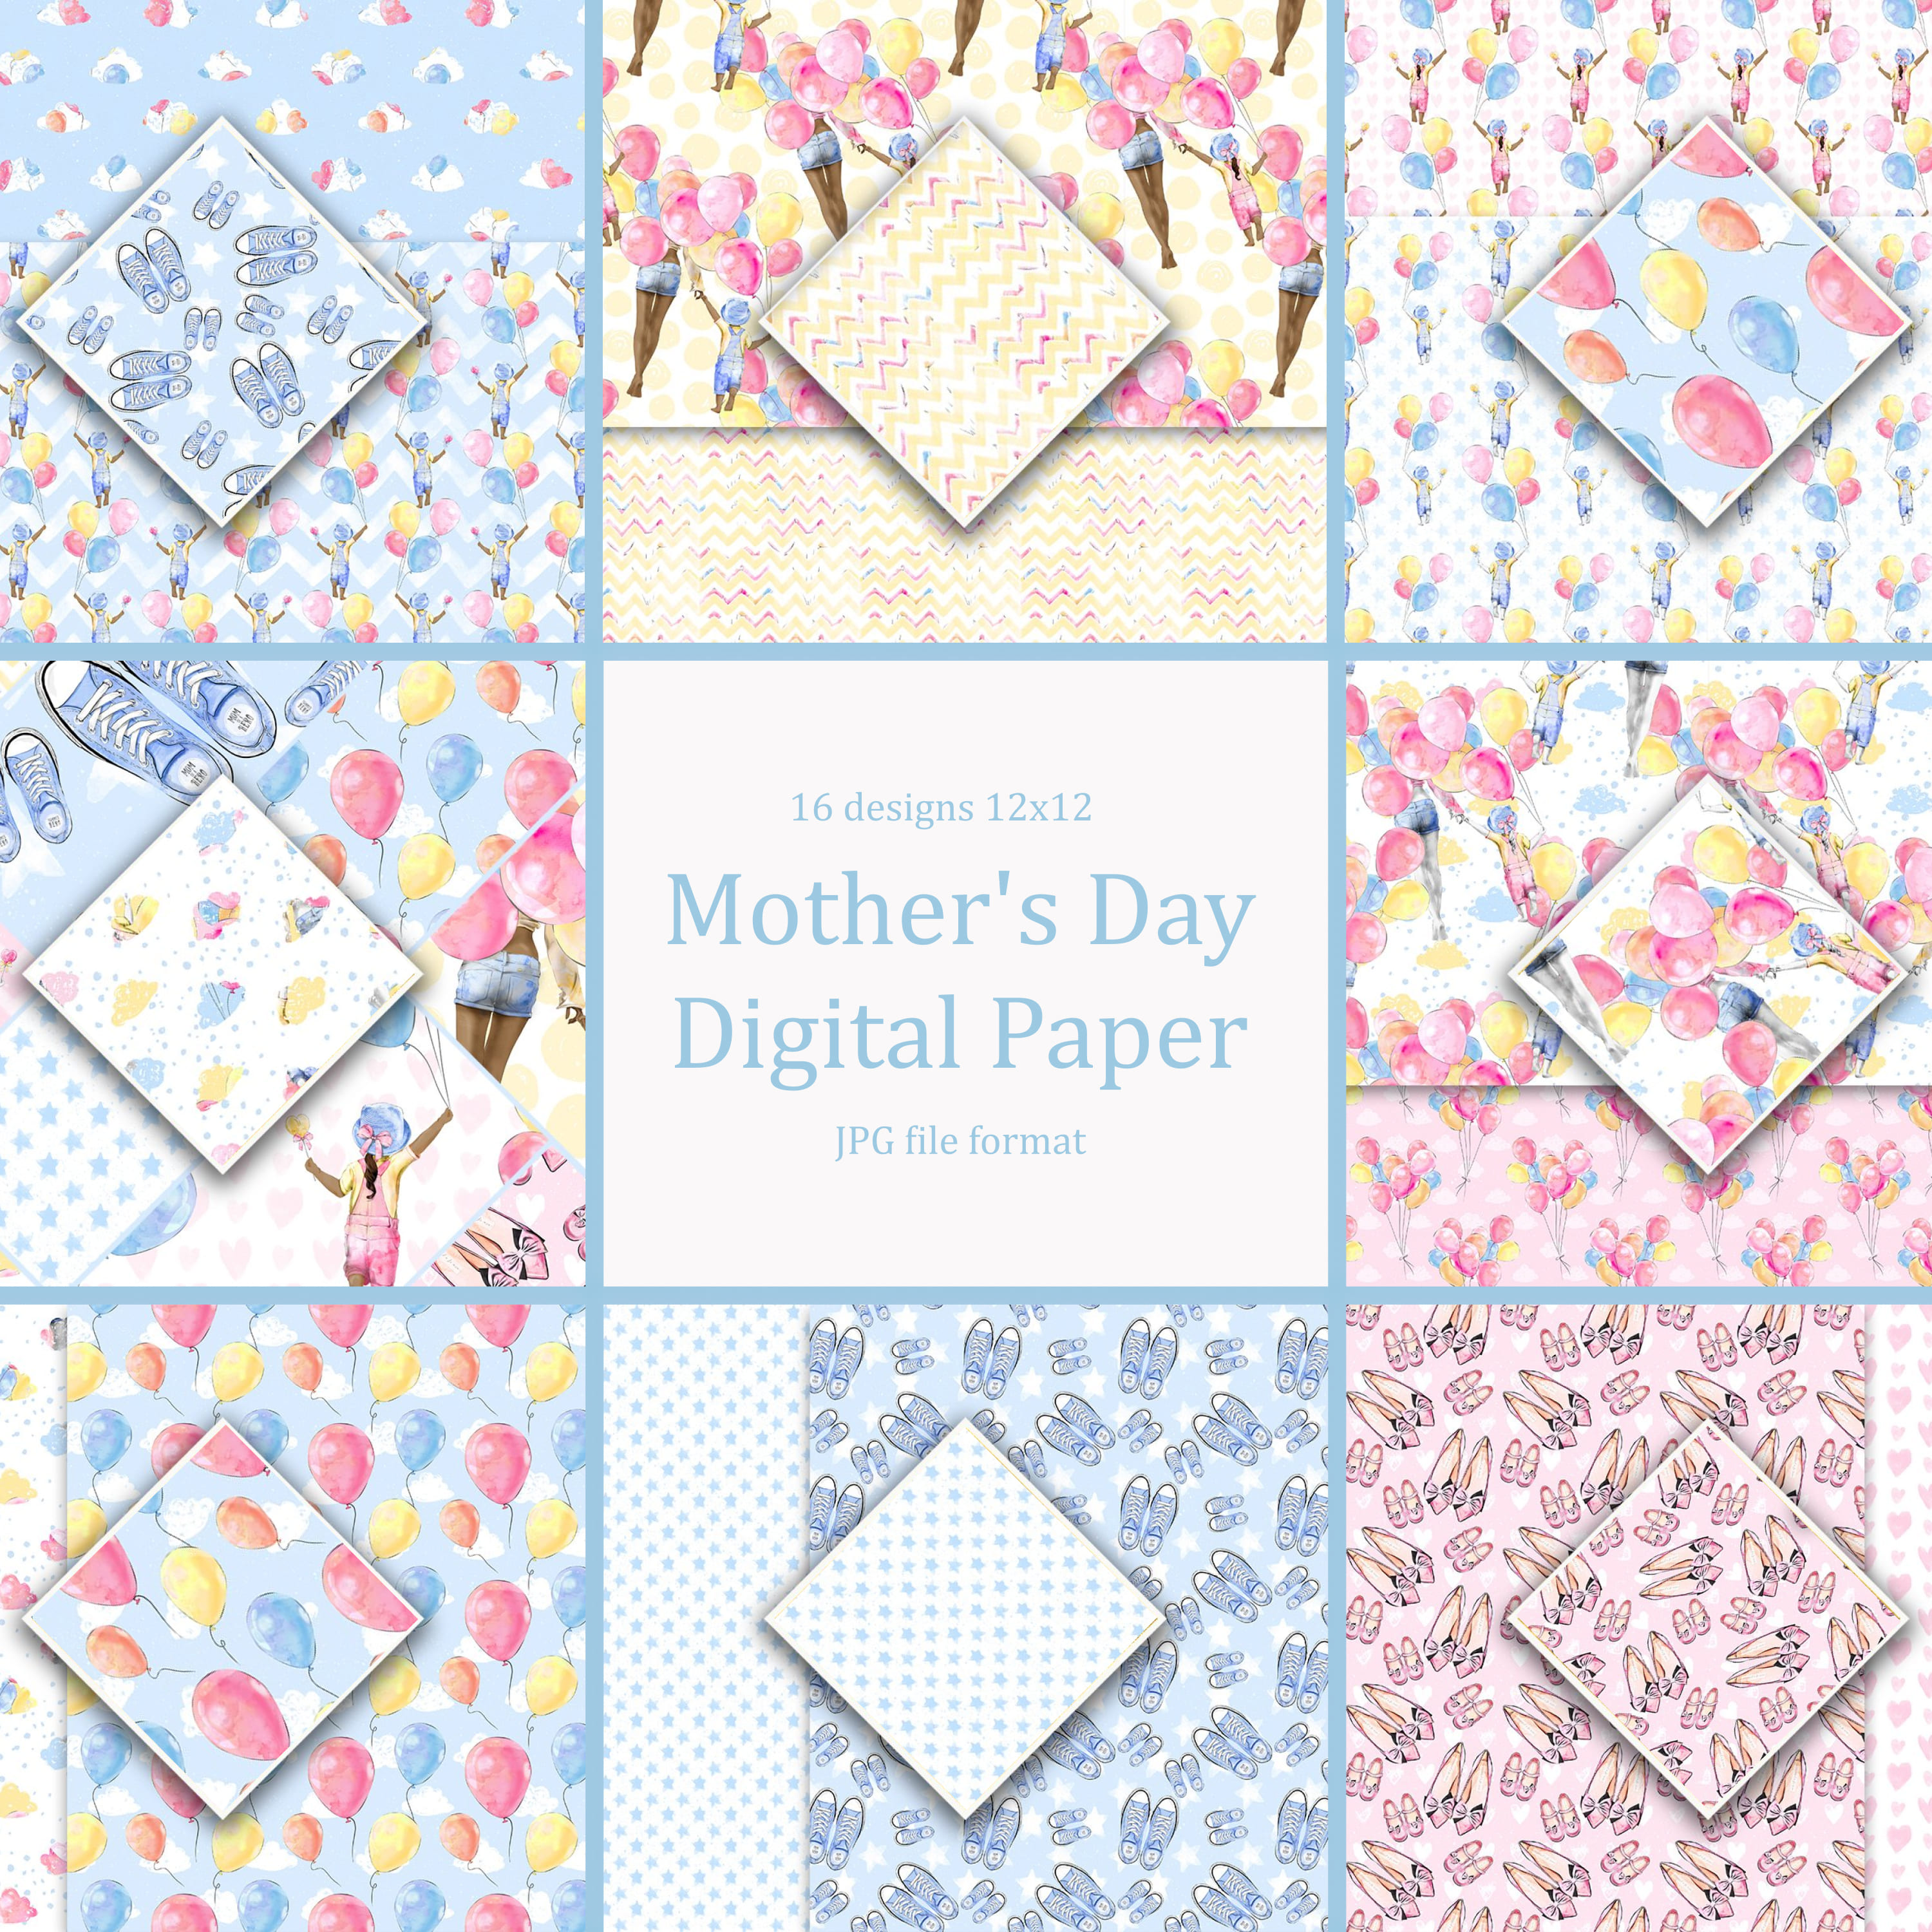 Mother's Day Digital Paper cover.